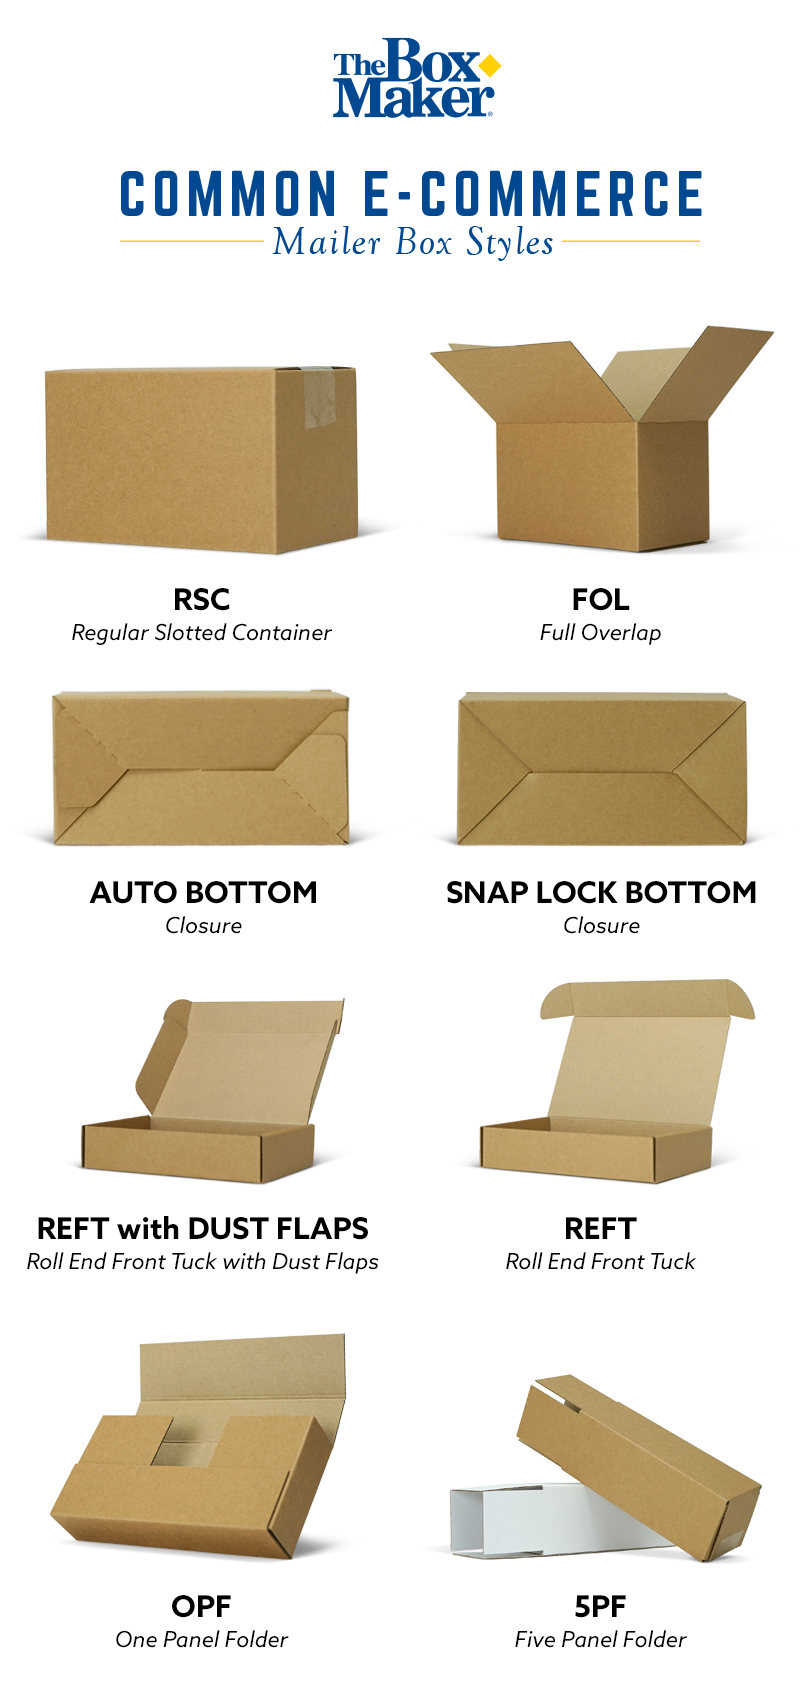 9 Different Types of Packaging Materials to Consider for Your eCommerce  Business